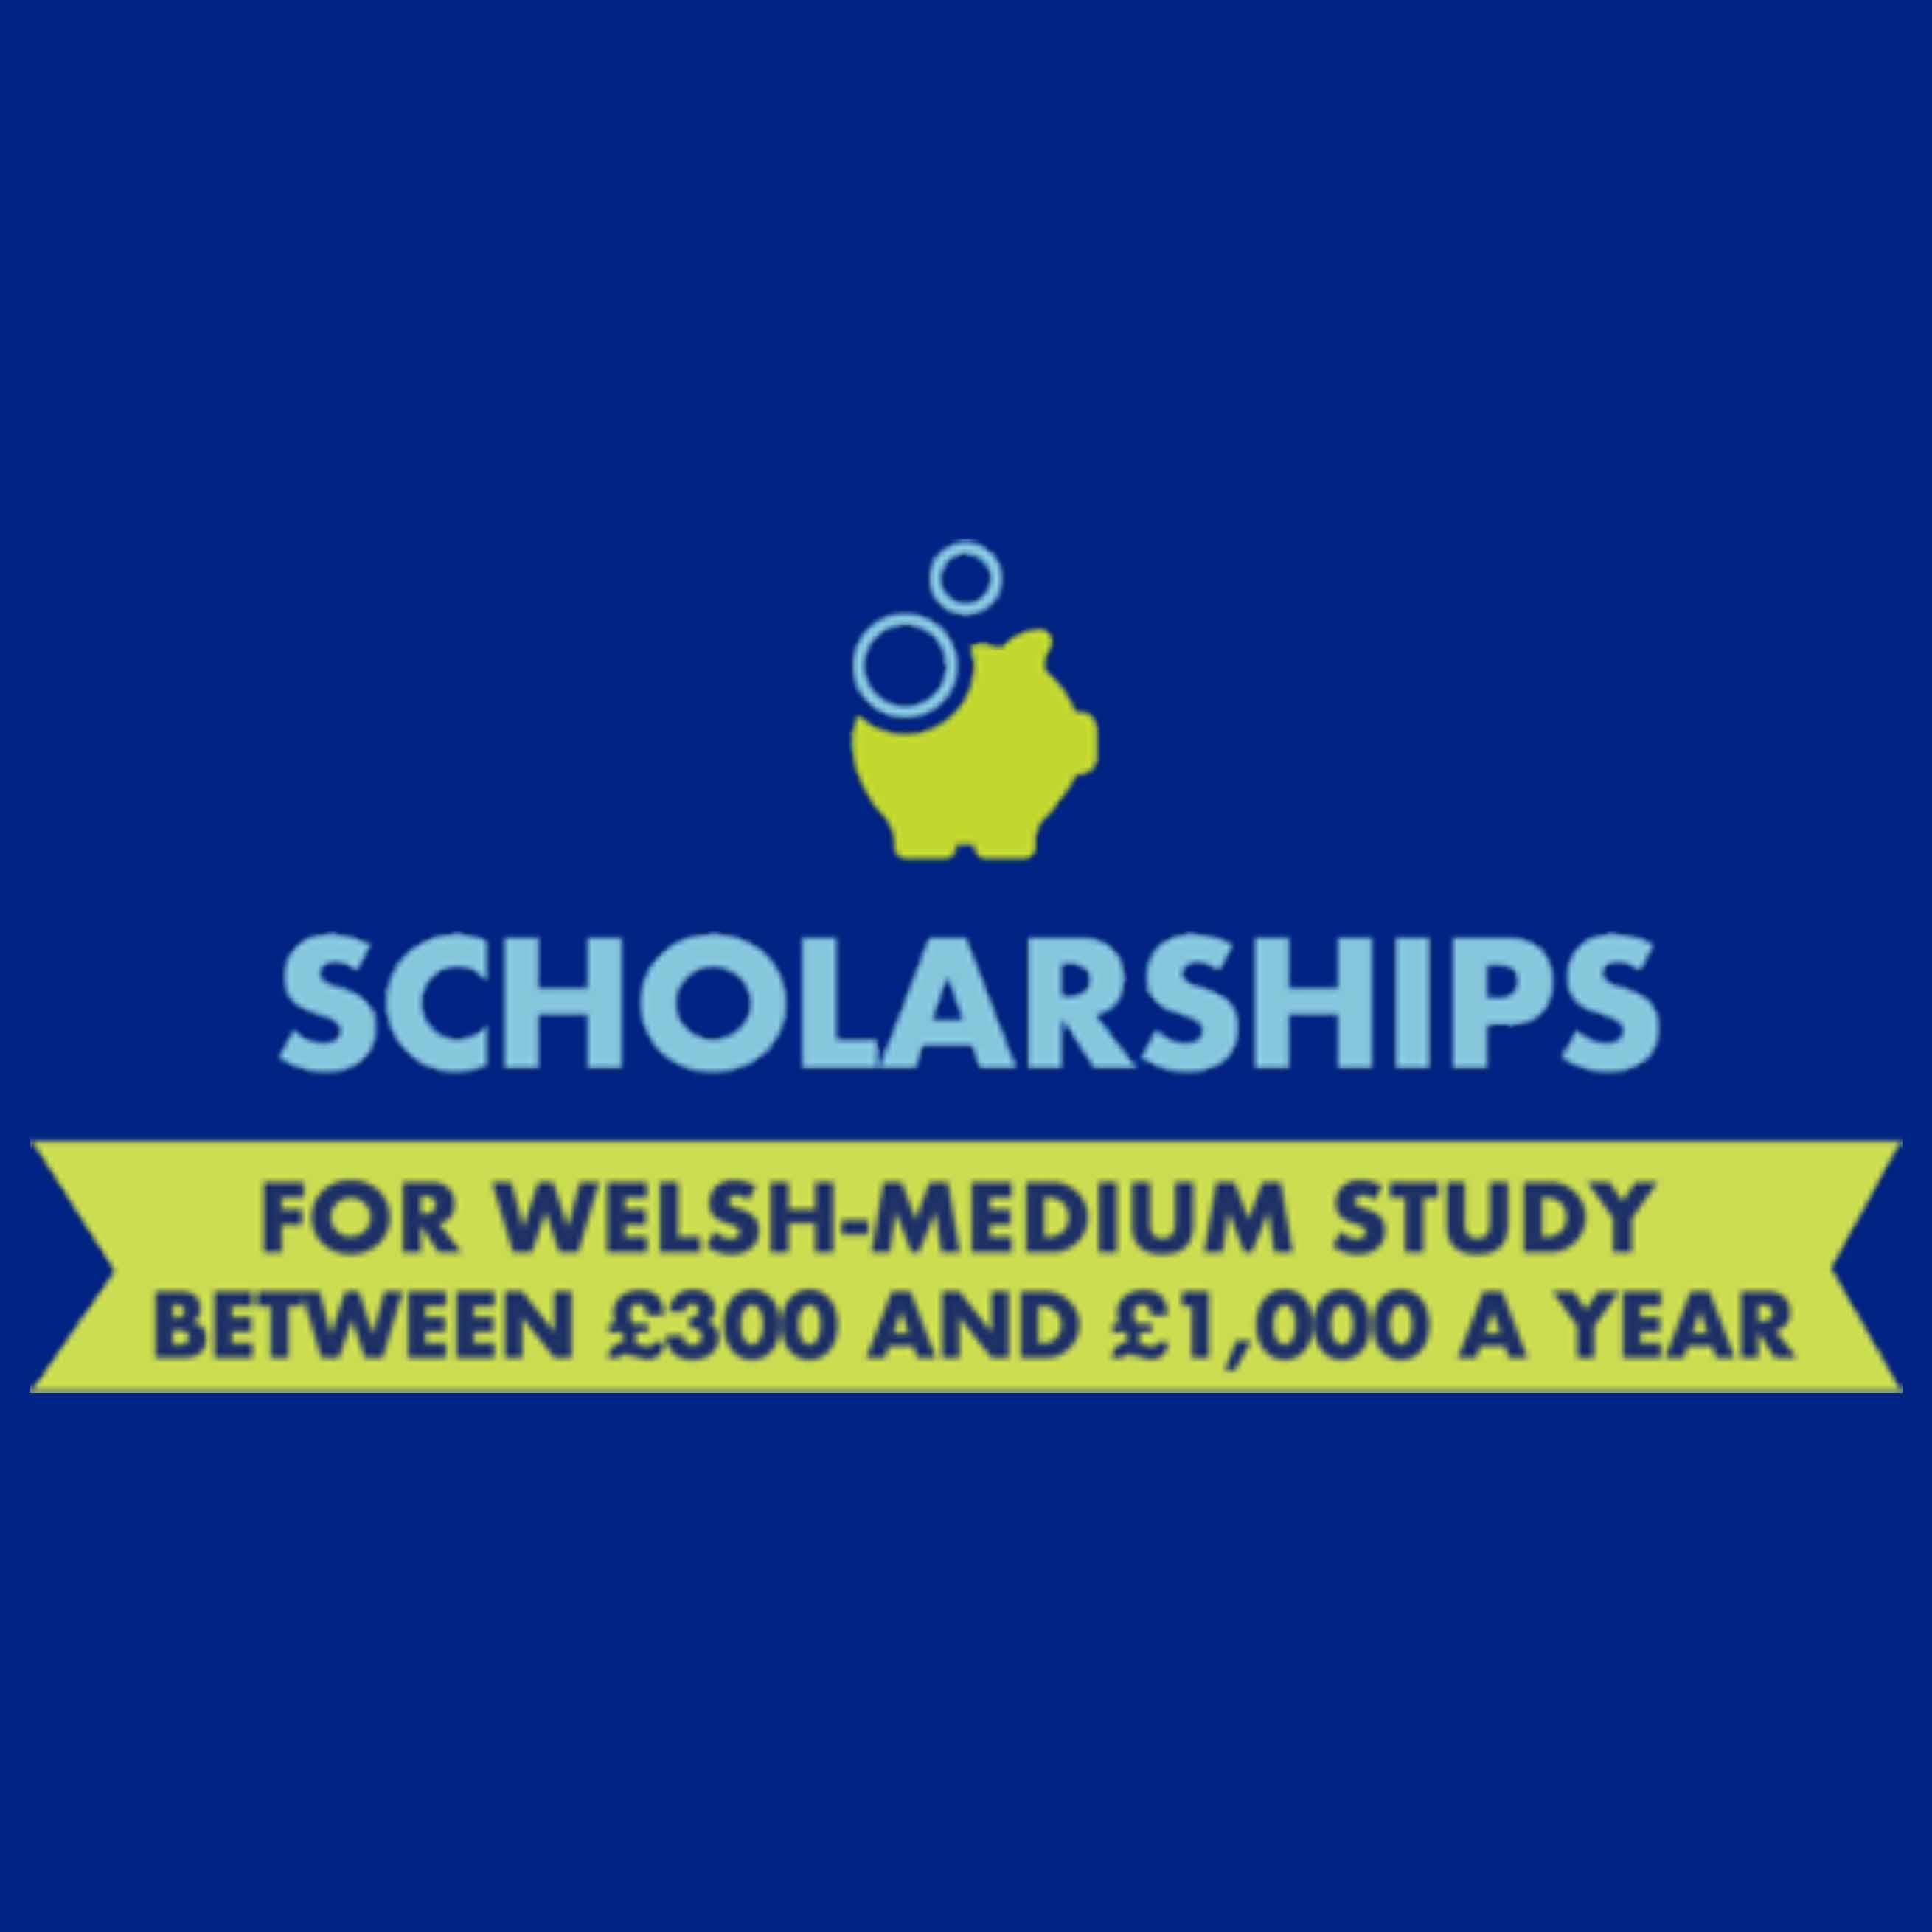 Scholarships for Welsh-medium study between £300 and £1000 a year